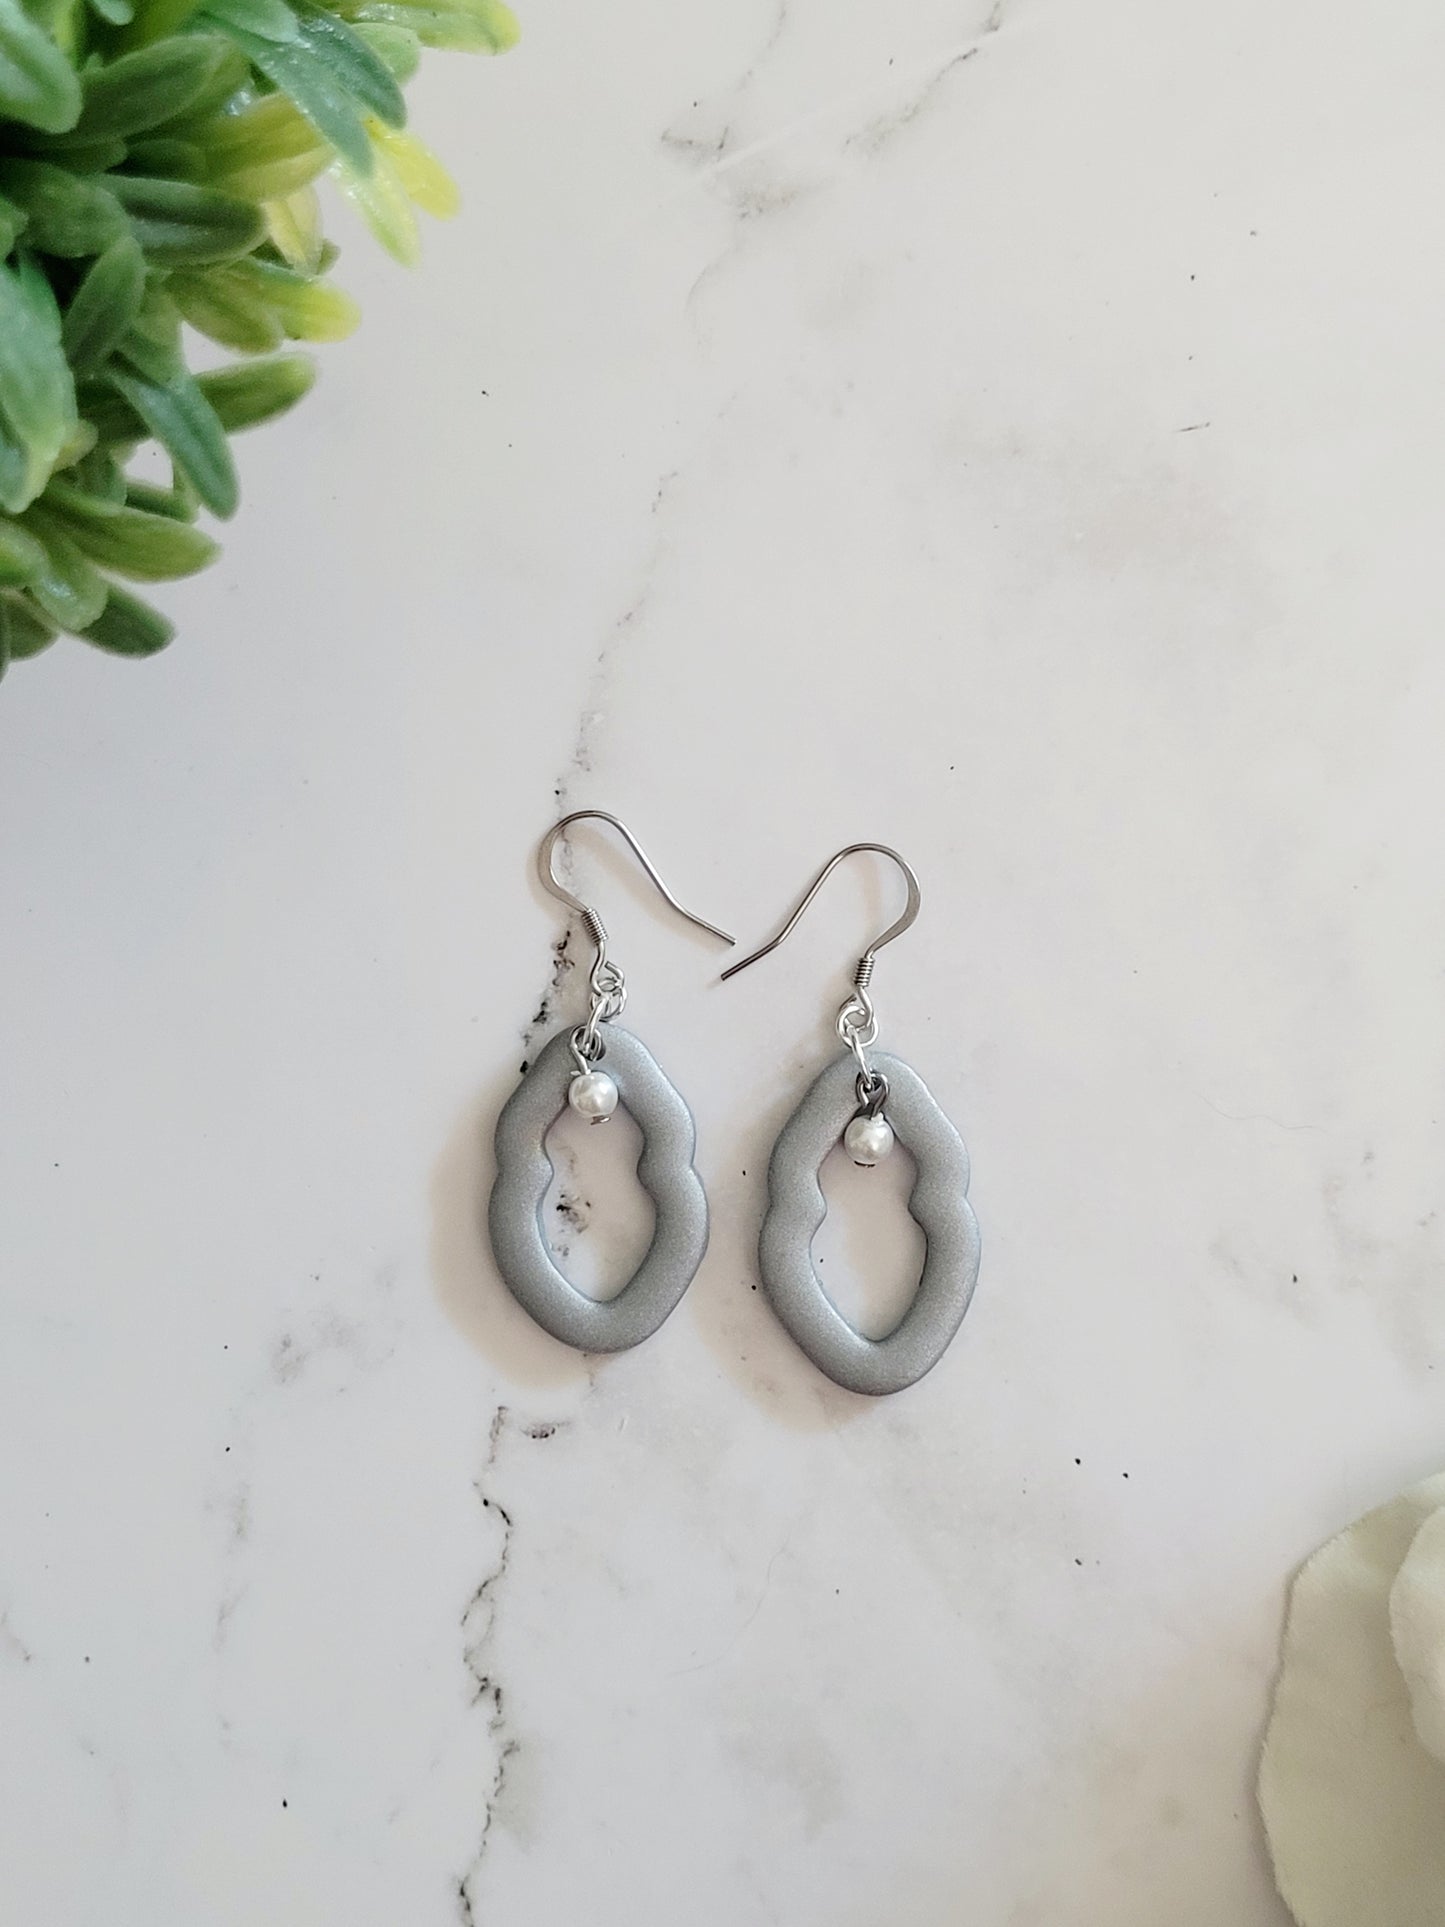 Closeup of small silver Vulva shaped earrings with pearl bead